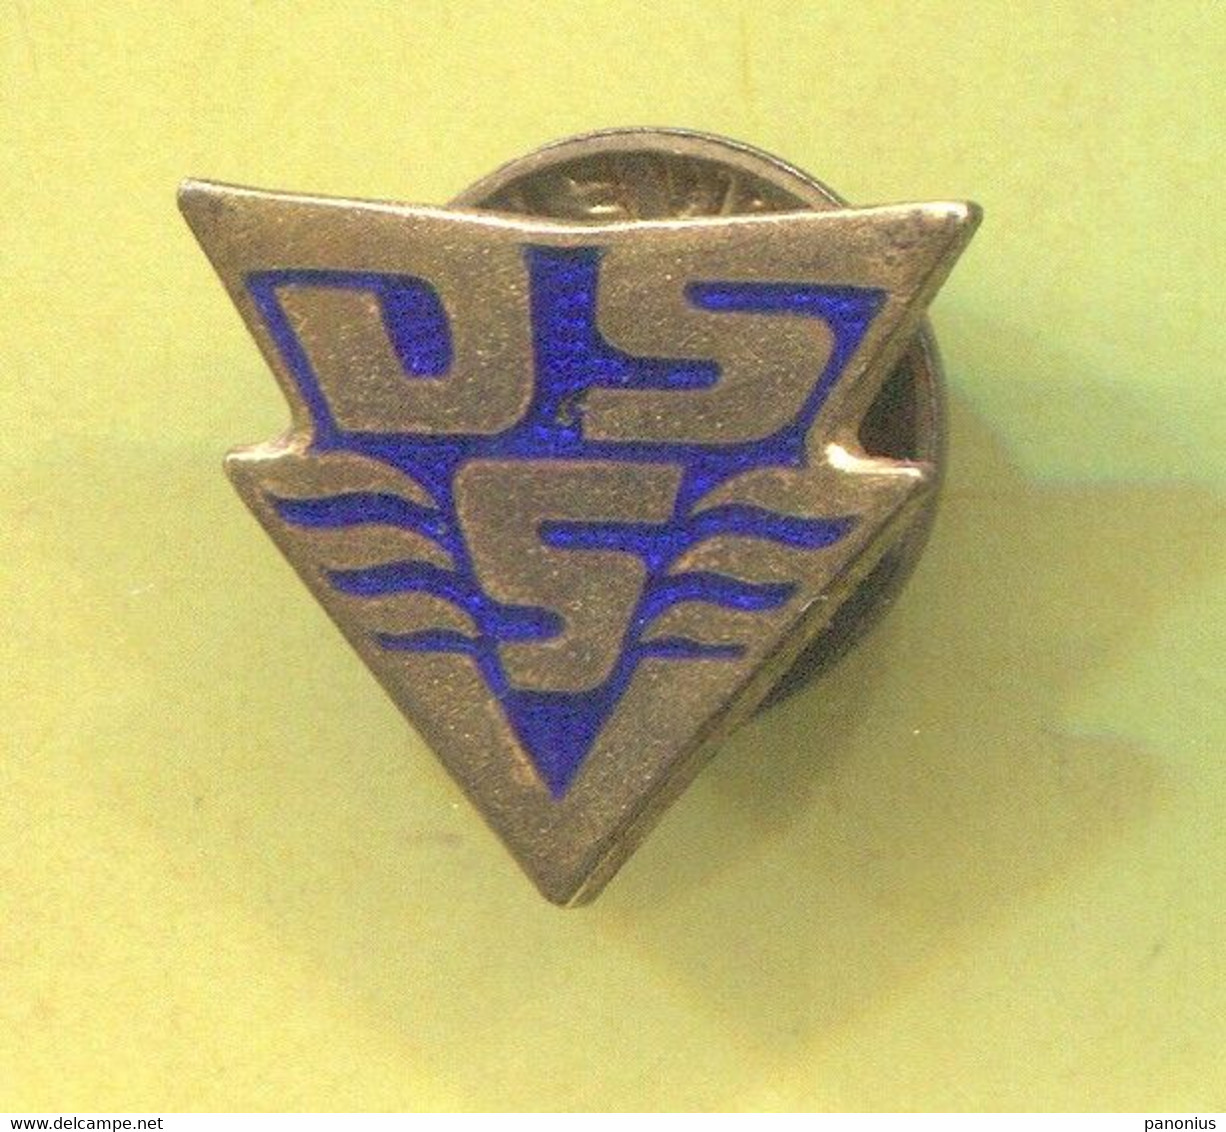 Swimming Natation - DDR East Germany, Vintage Pin Badge Abzeichen - Natation